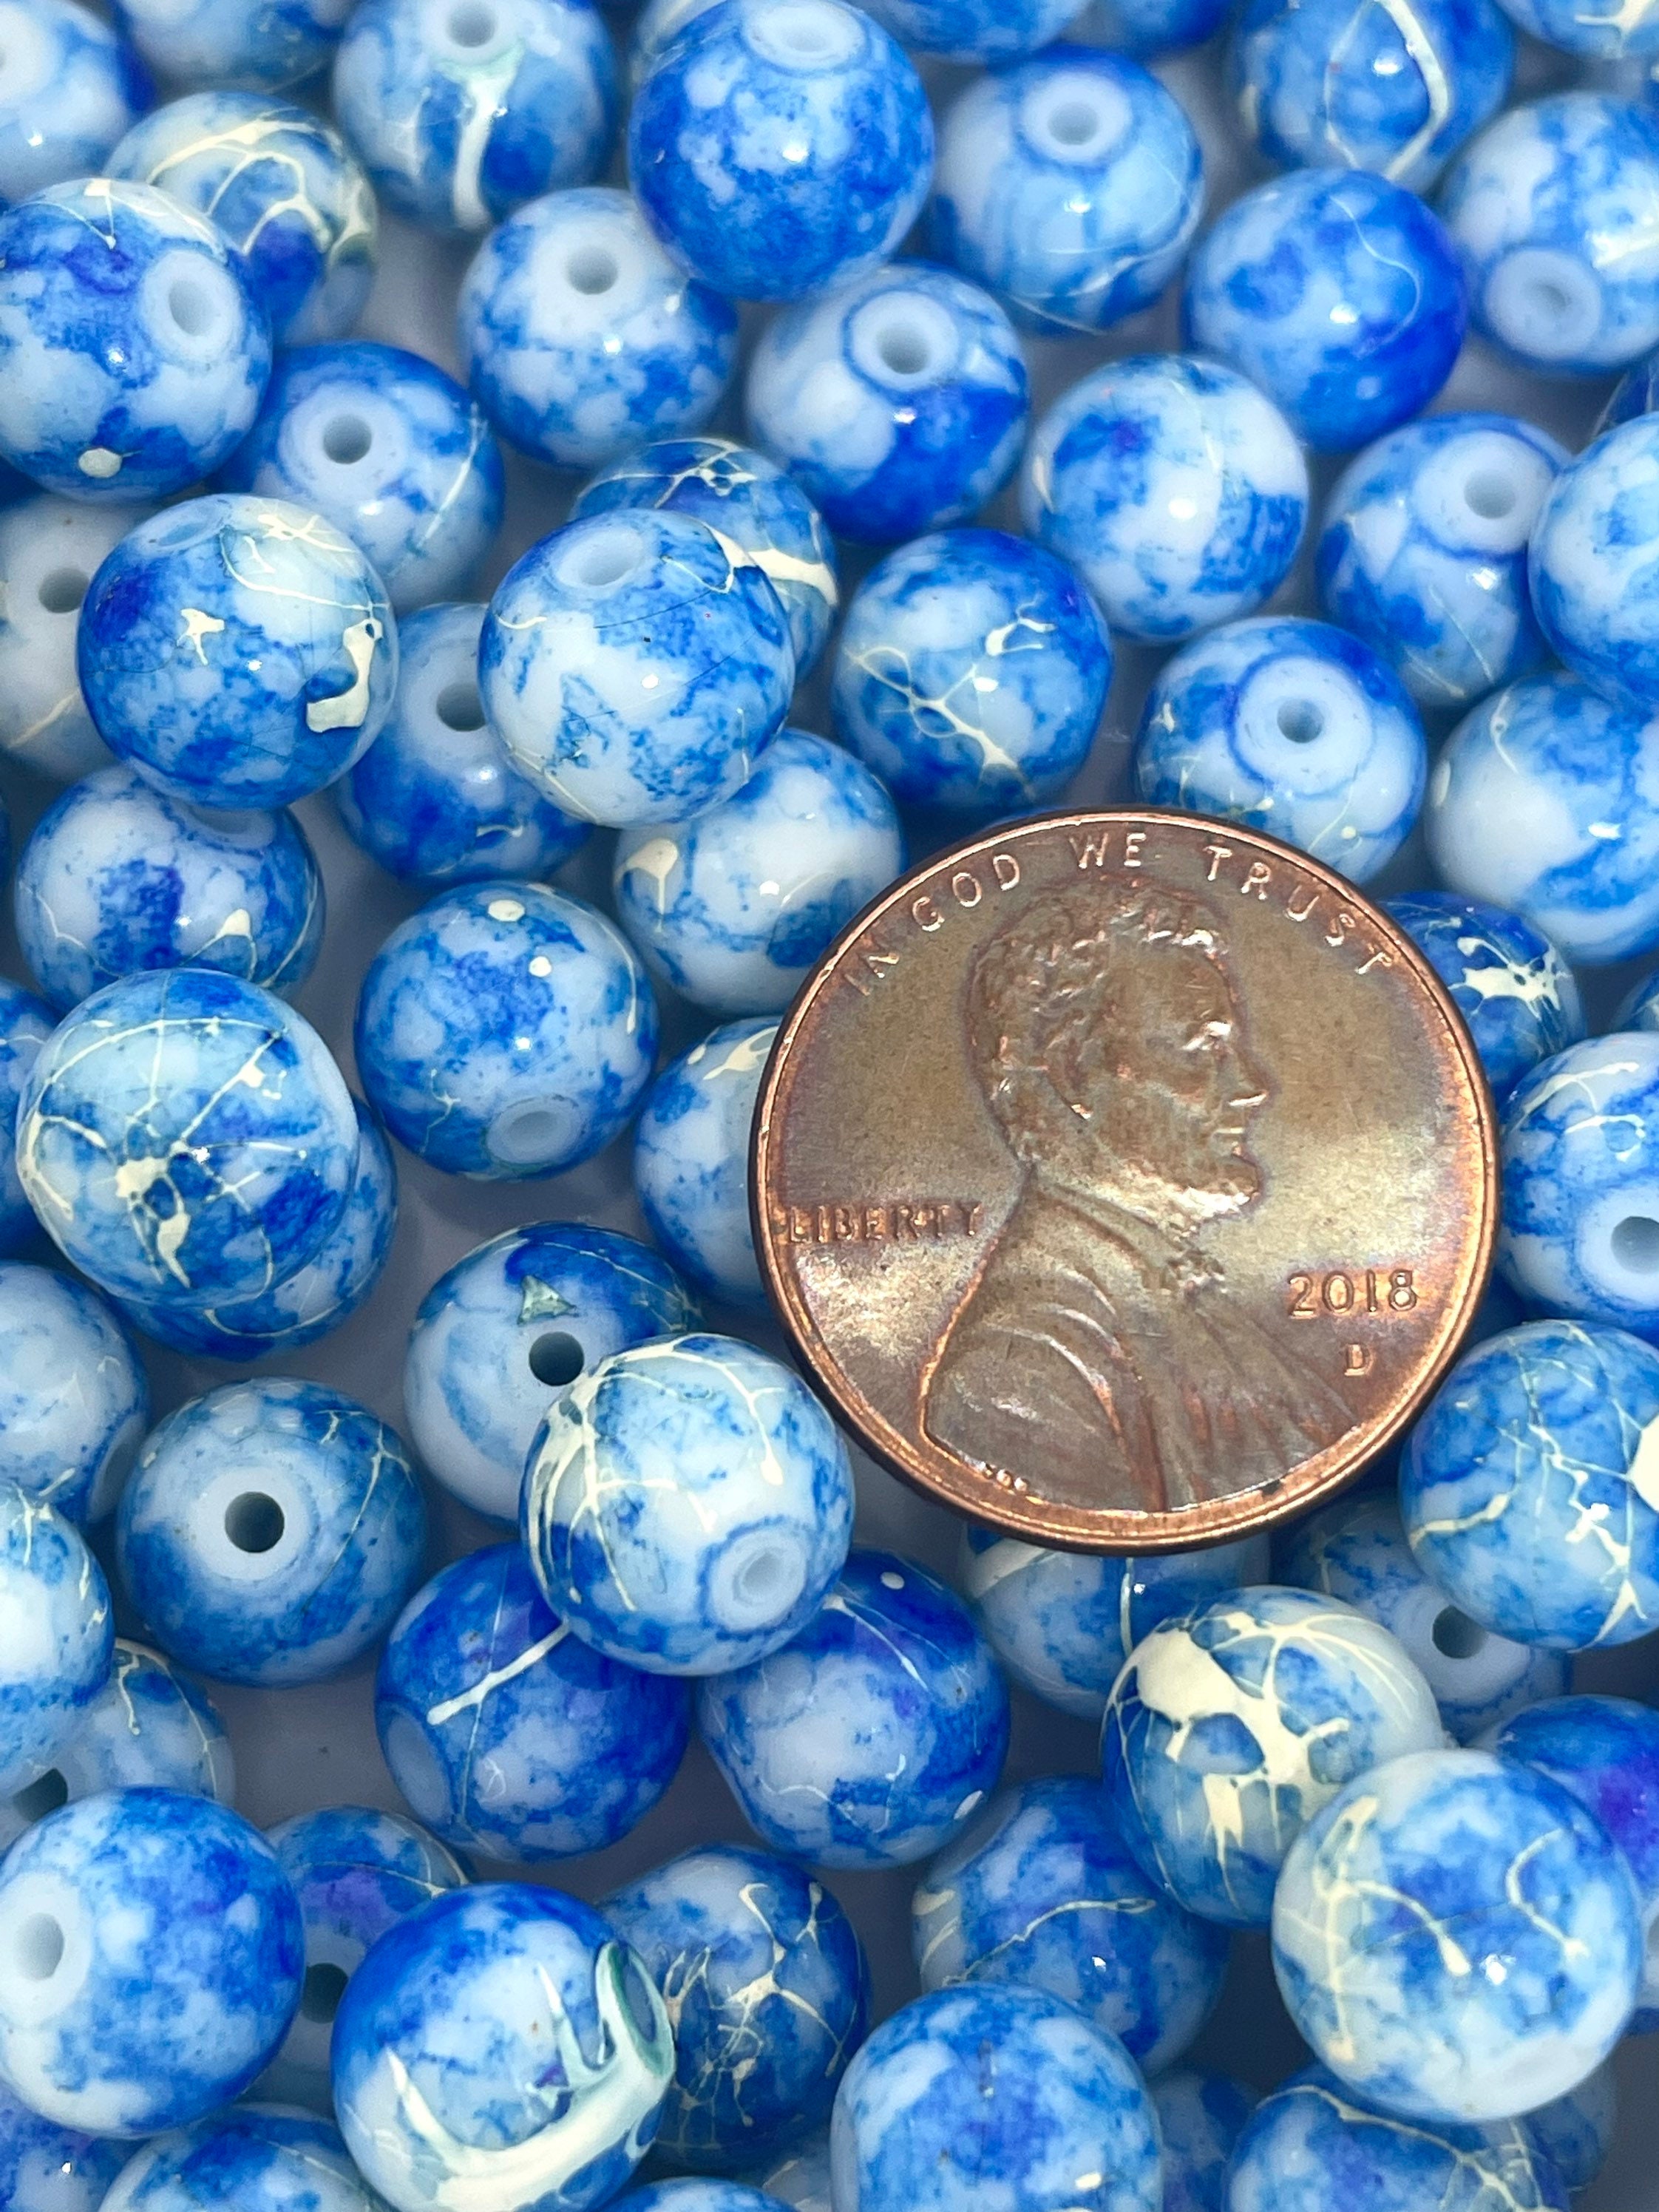 14mm Blue with Blue & White Swirls & Dots Large Hole Glass Beads - CLE –  Goody Beads